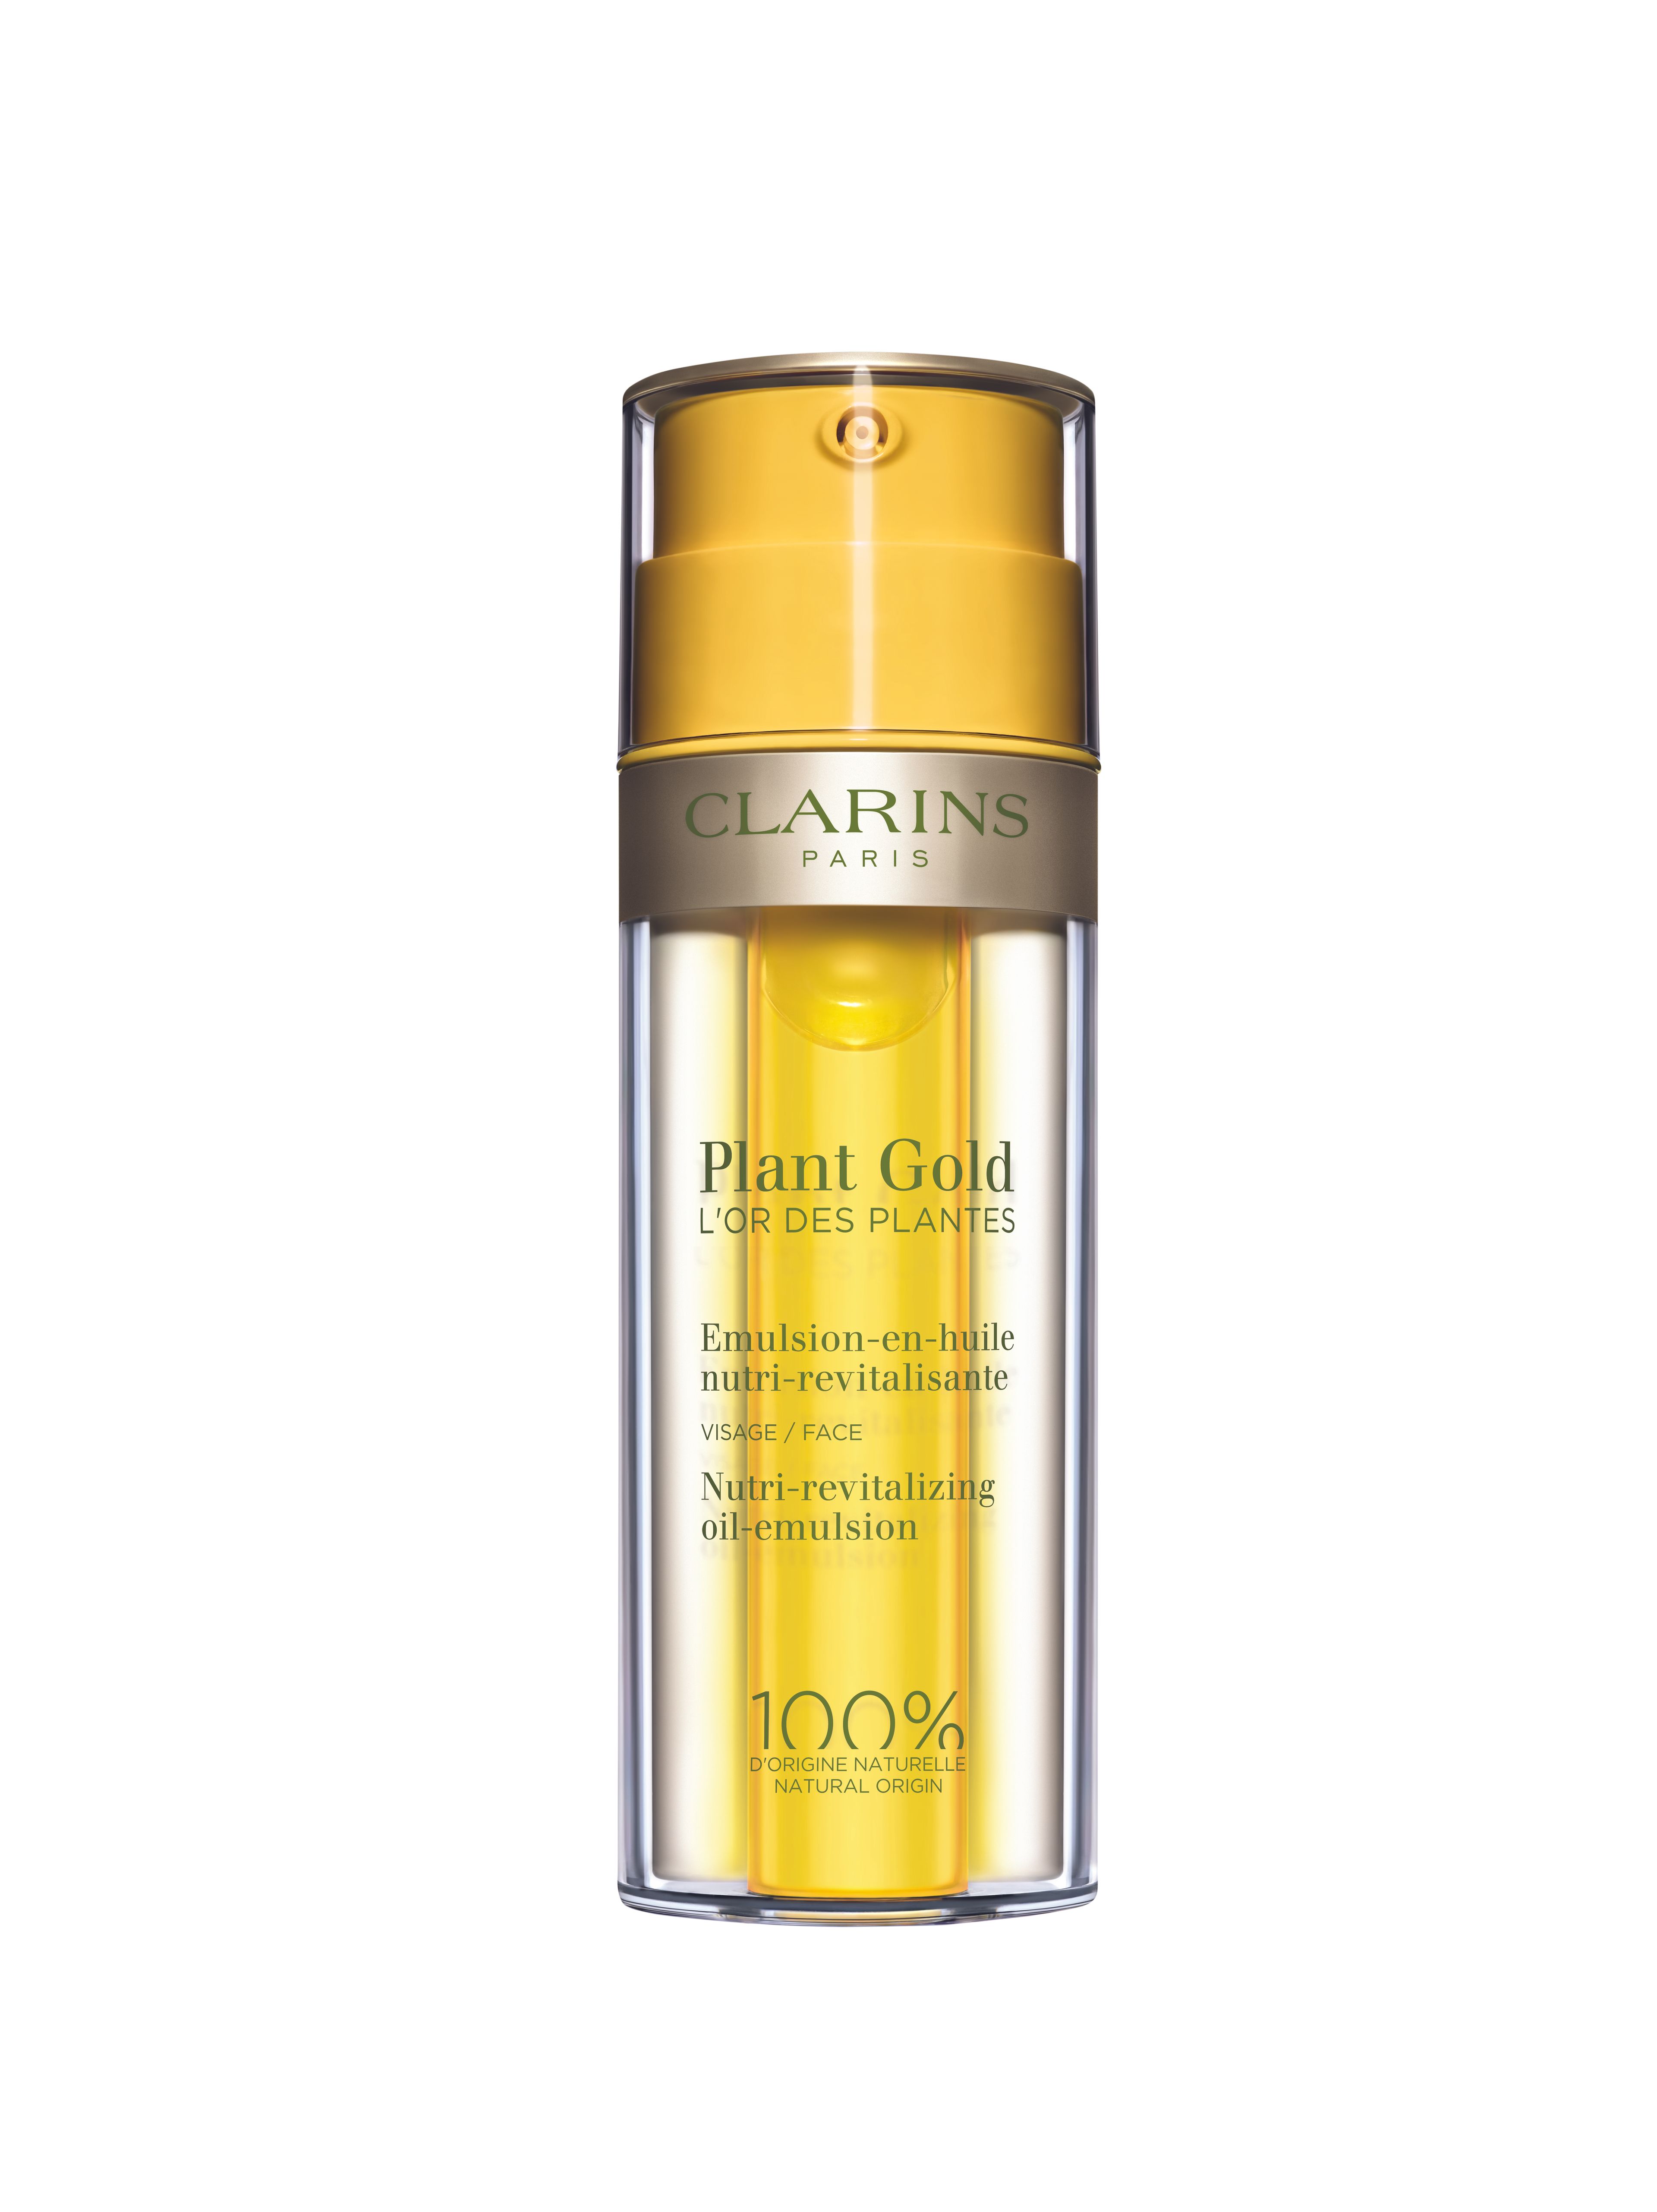 Plant Gold Clarins 1